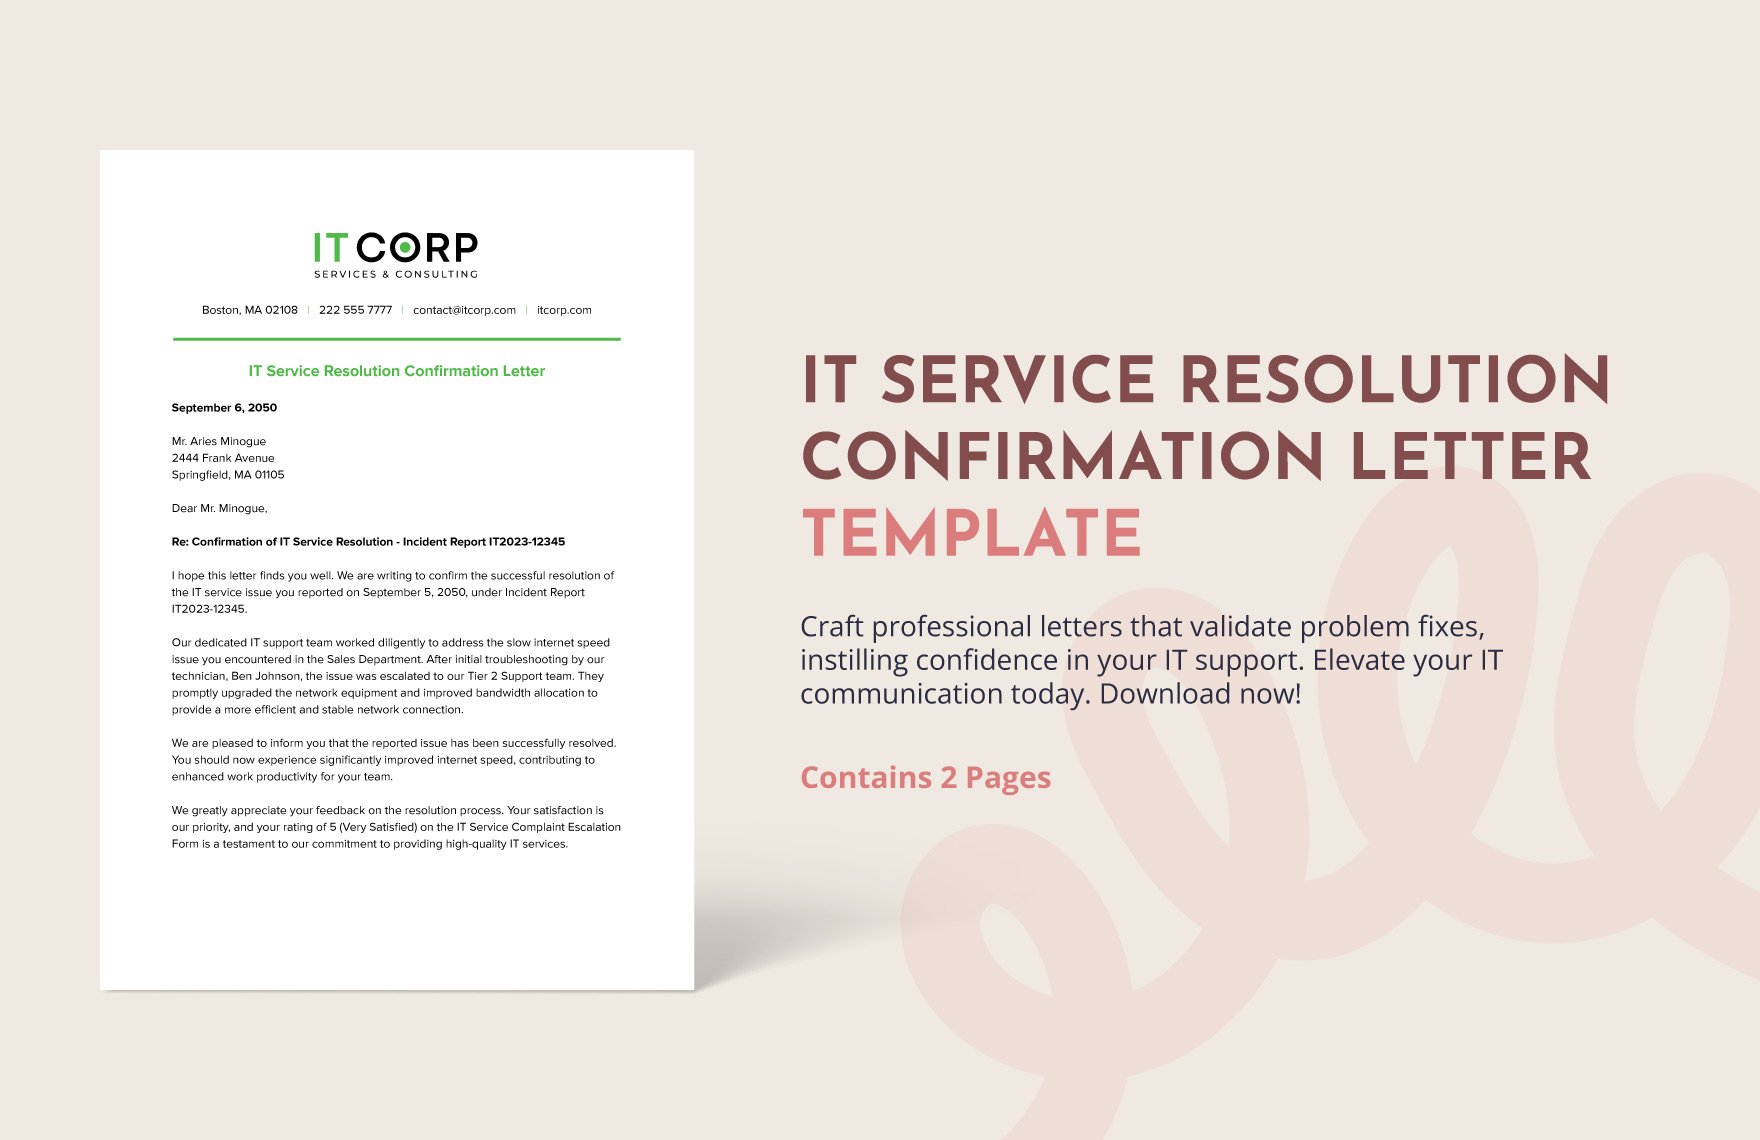 IT Service Resolution Confirmation Letter Template